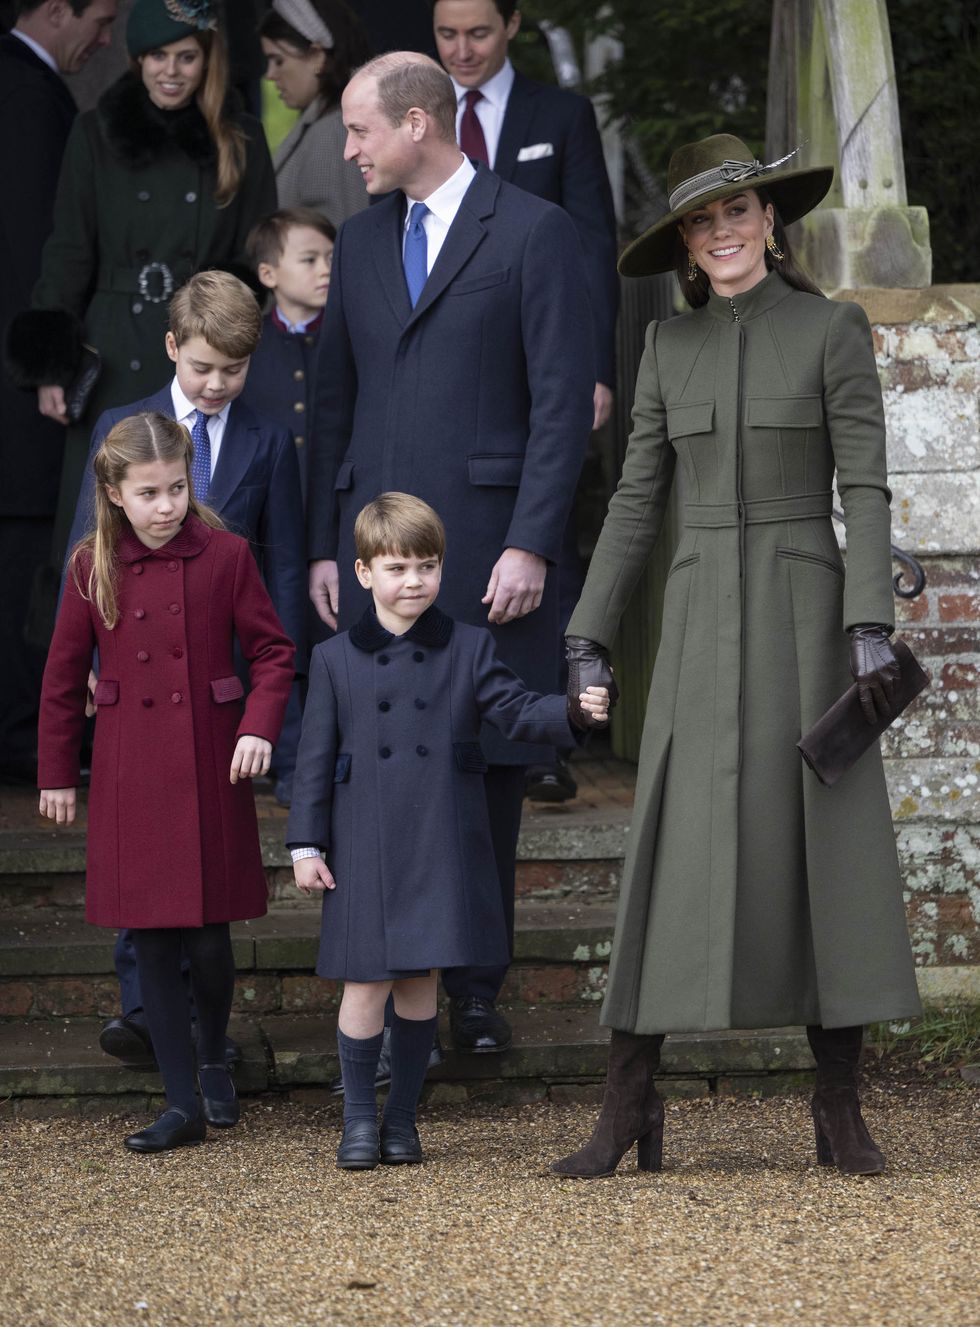 sandringham, norfolk december 25 prince william, prince of wales and catherine, princess of wales with prince george of wales, princess charlotte of wales and prince louis of wales attend the christmas day service at st mary magdalene church on december 25, 2022 in sandringham, norfolk king charles iii ascended to the throne on september 8, 2022, with his coronation set for may 6, 2023 photo by uk press pooluk press via getty images